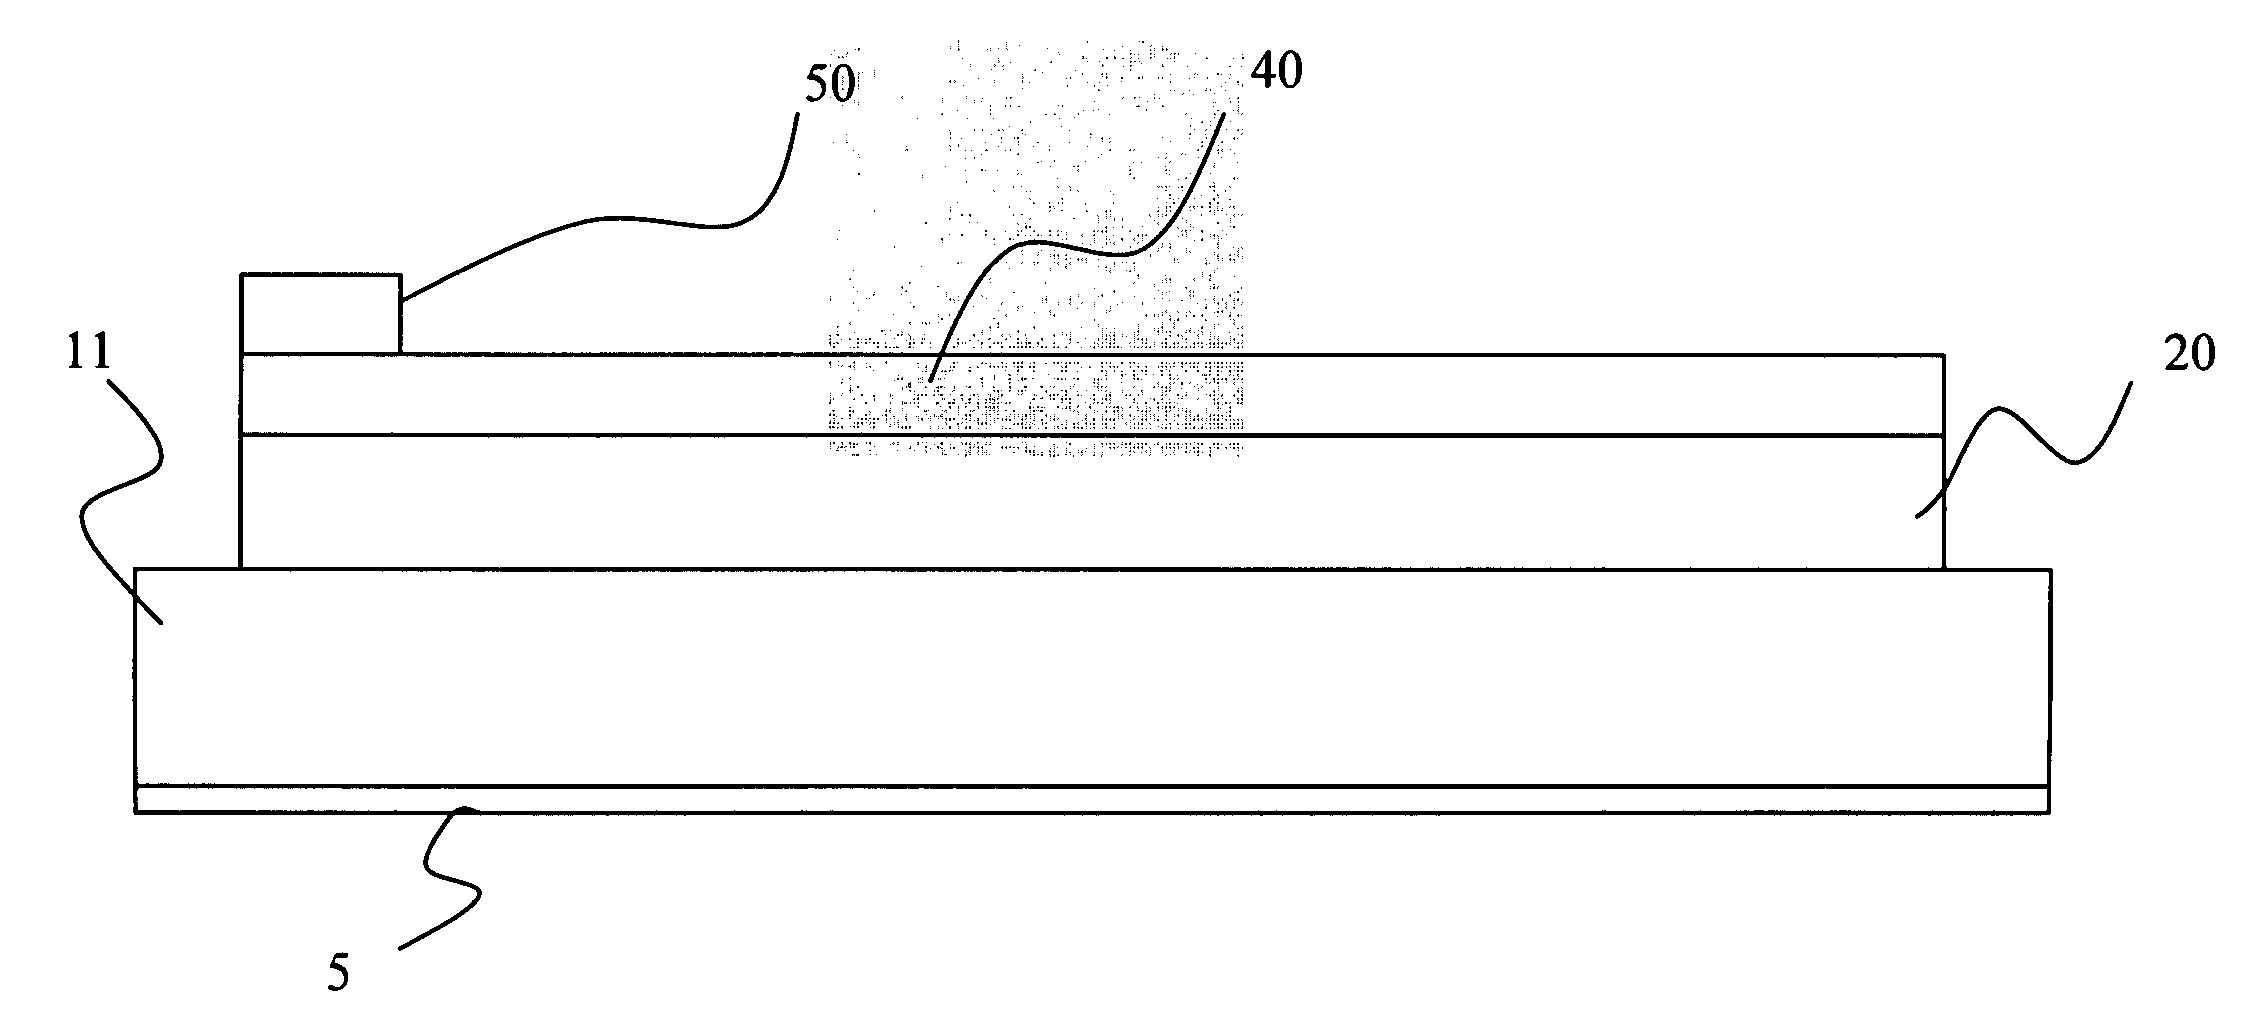 Light emitting devices with a zinc oxide thin film structure